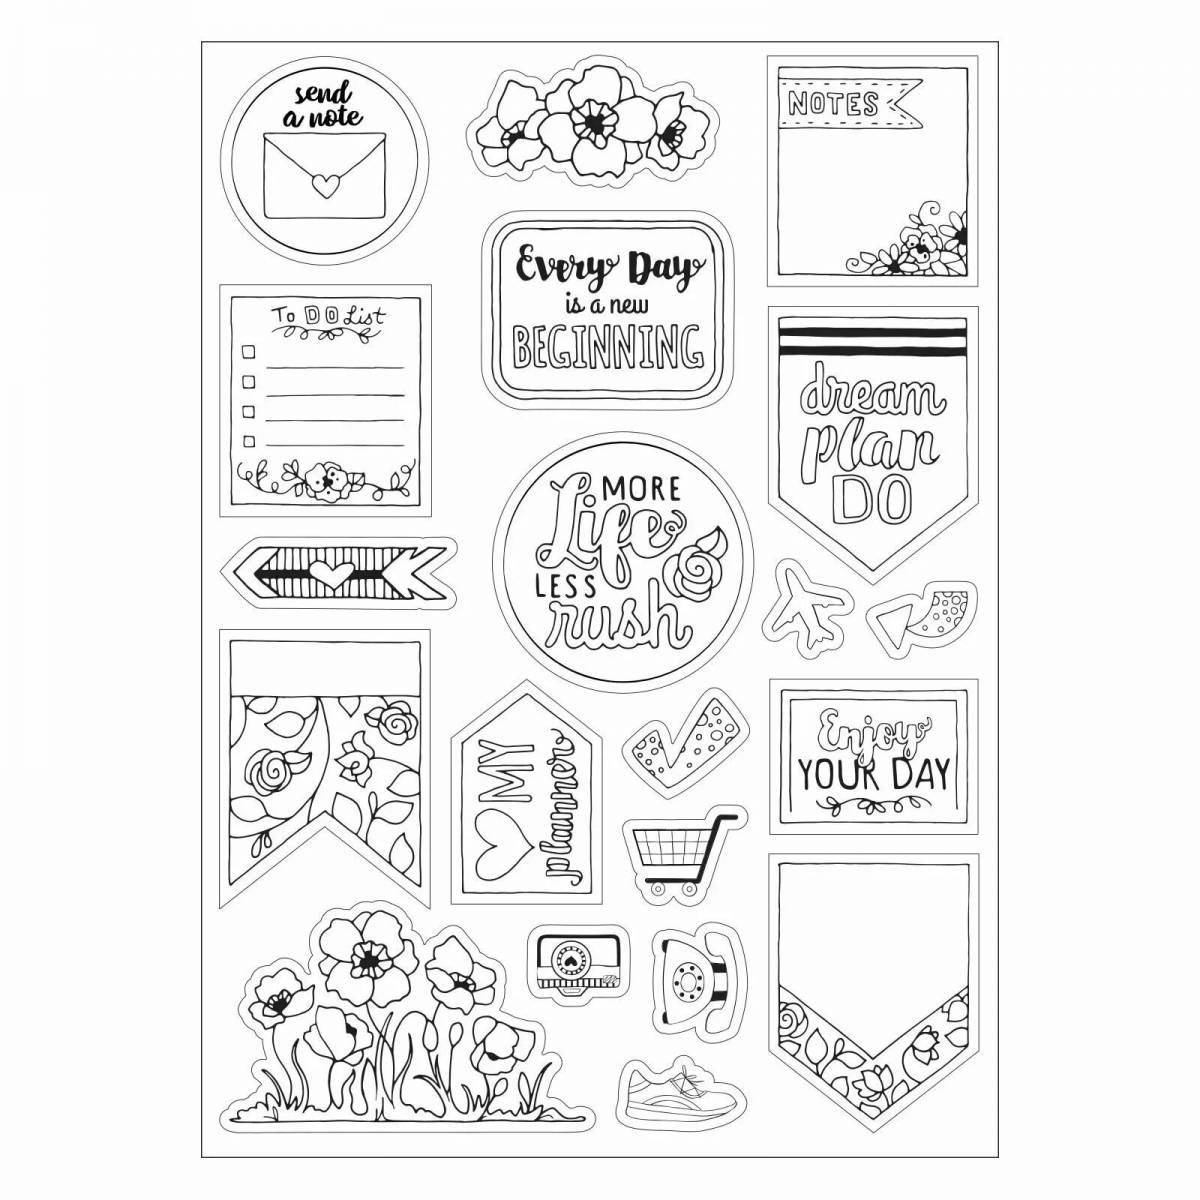 Fun printable coloring pages